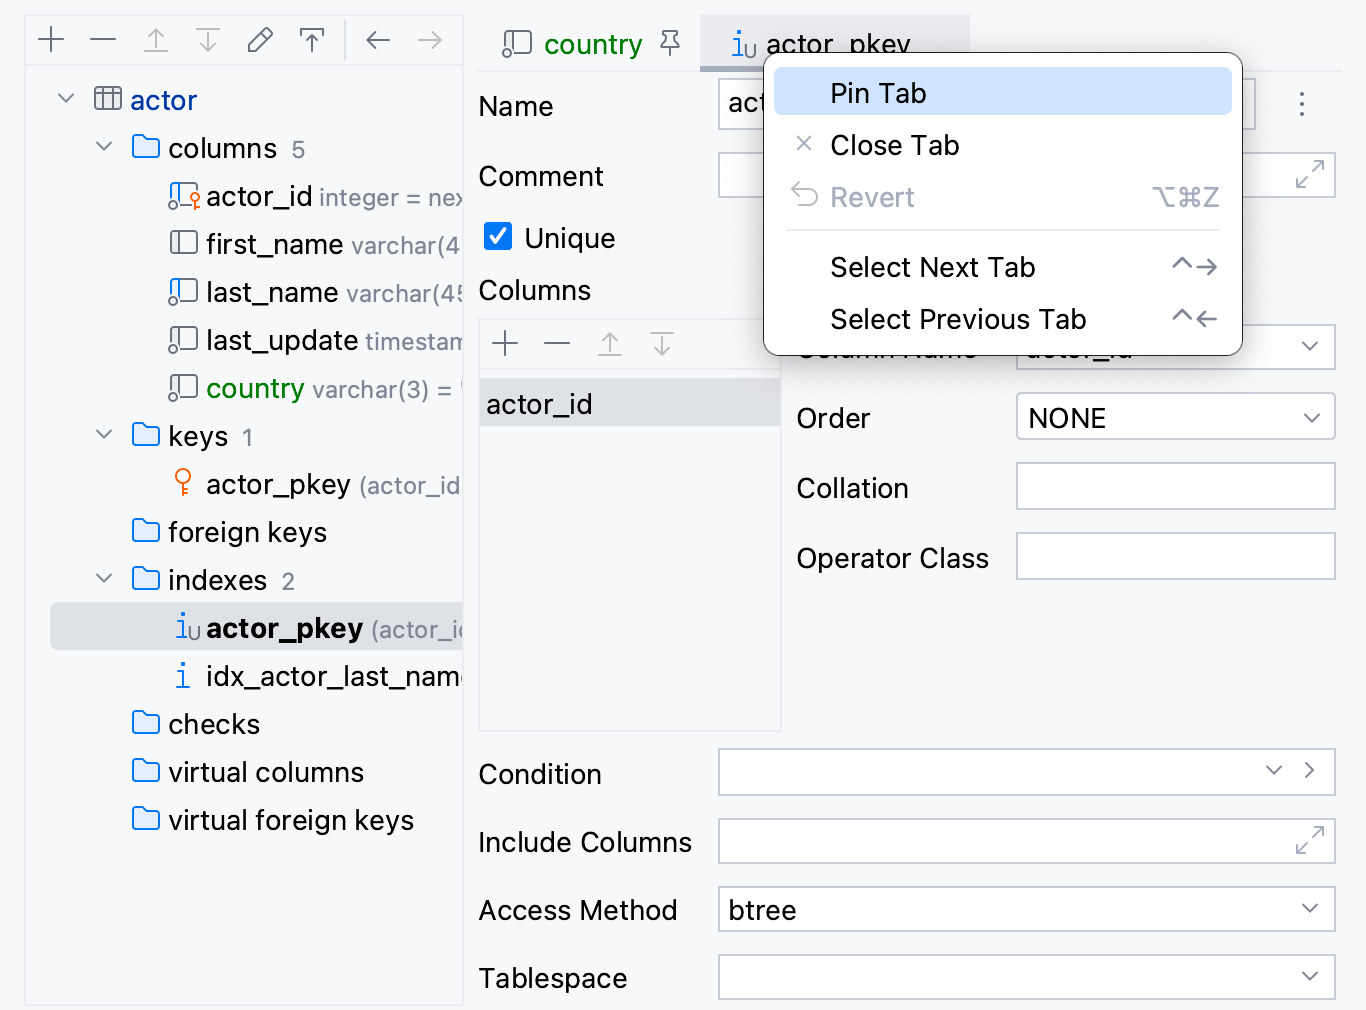 Object editor tabs in the Modify dialog